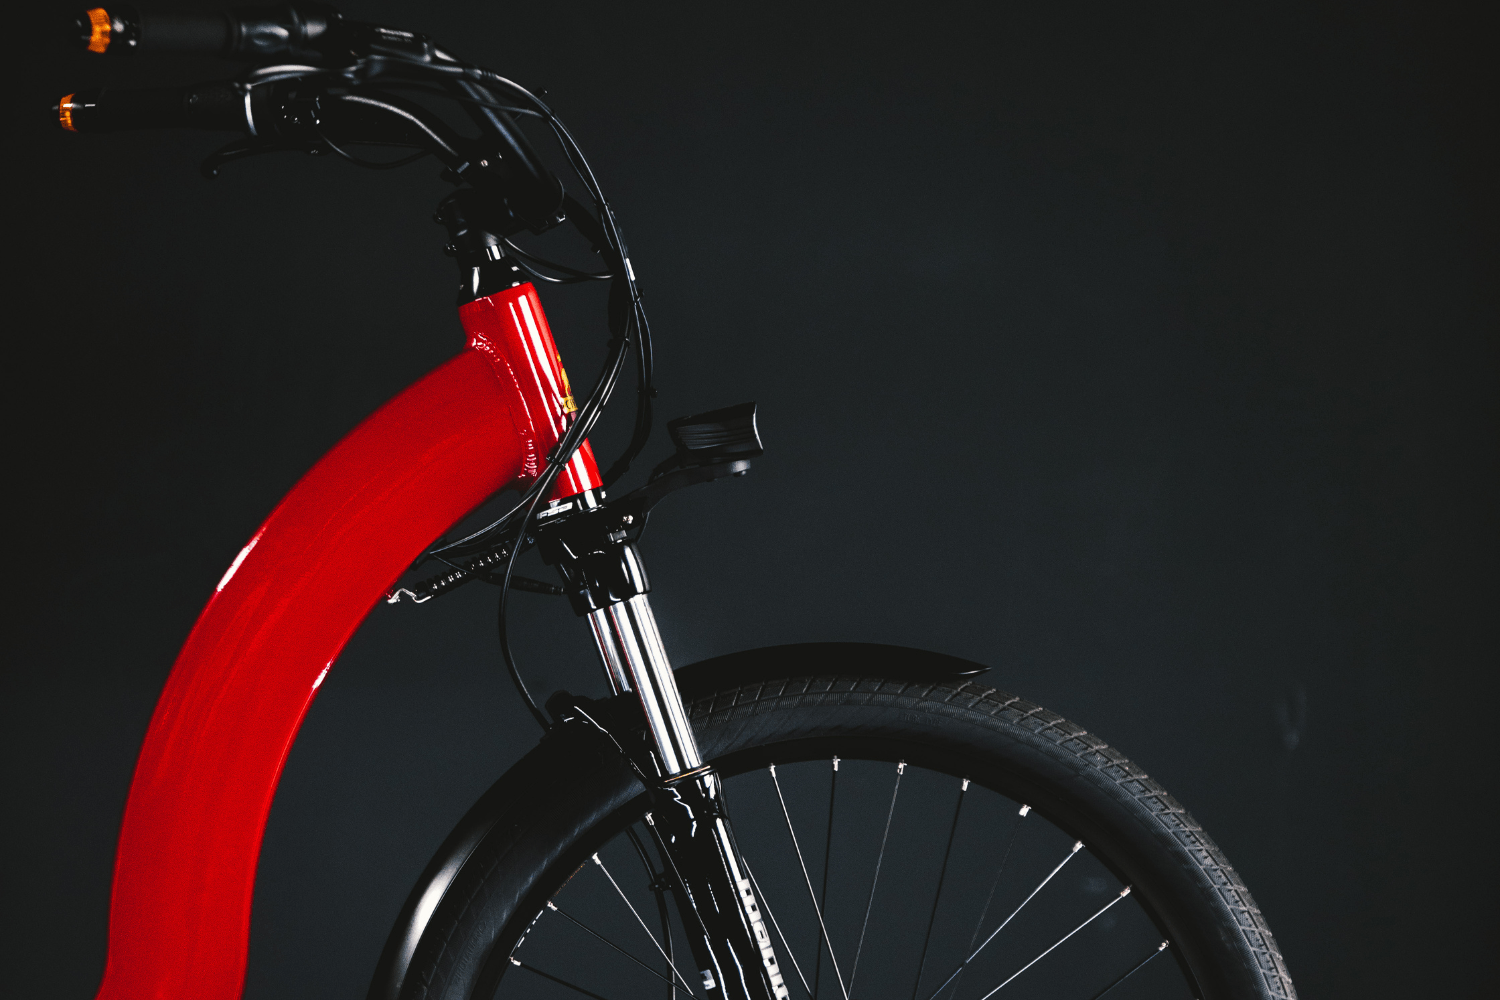 Civilized Cycles Model 1